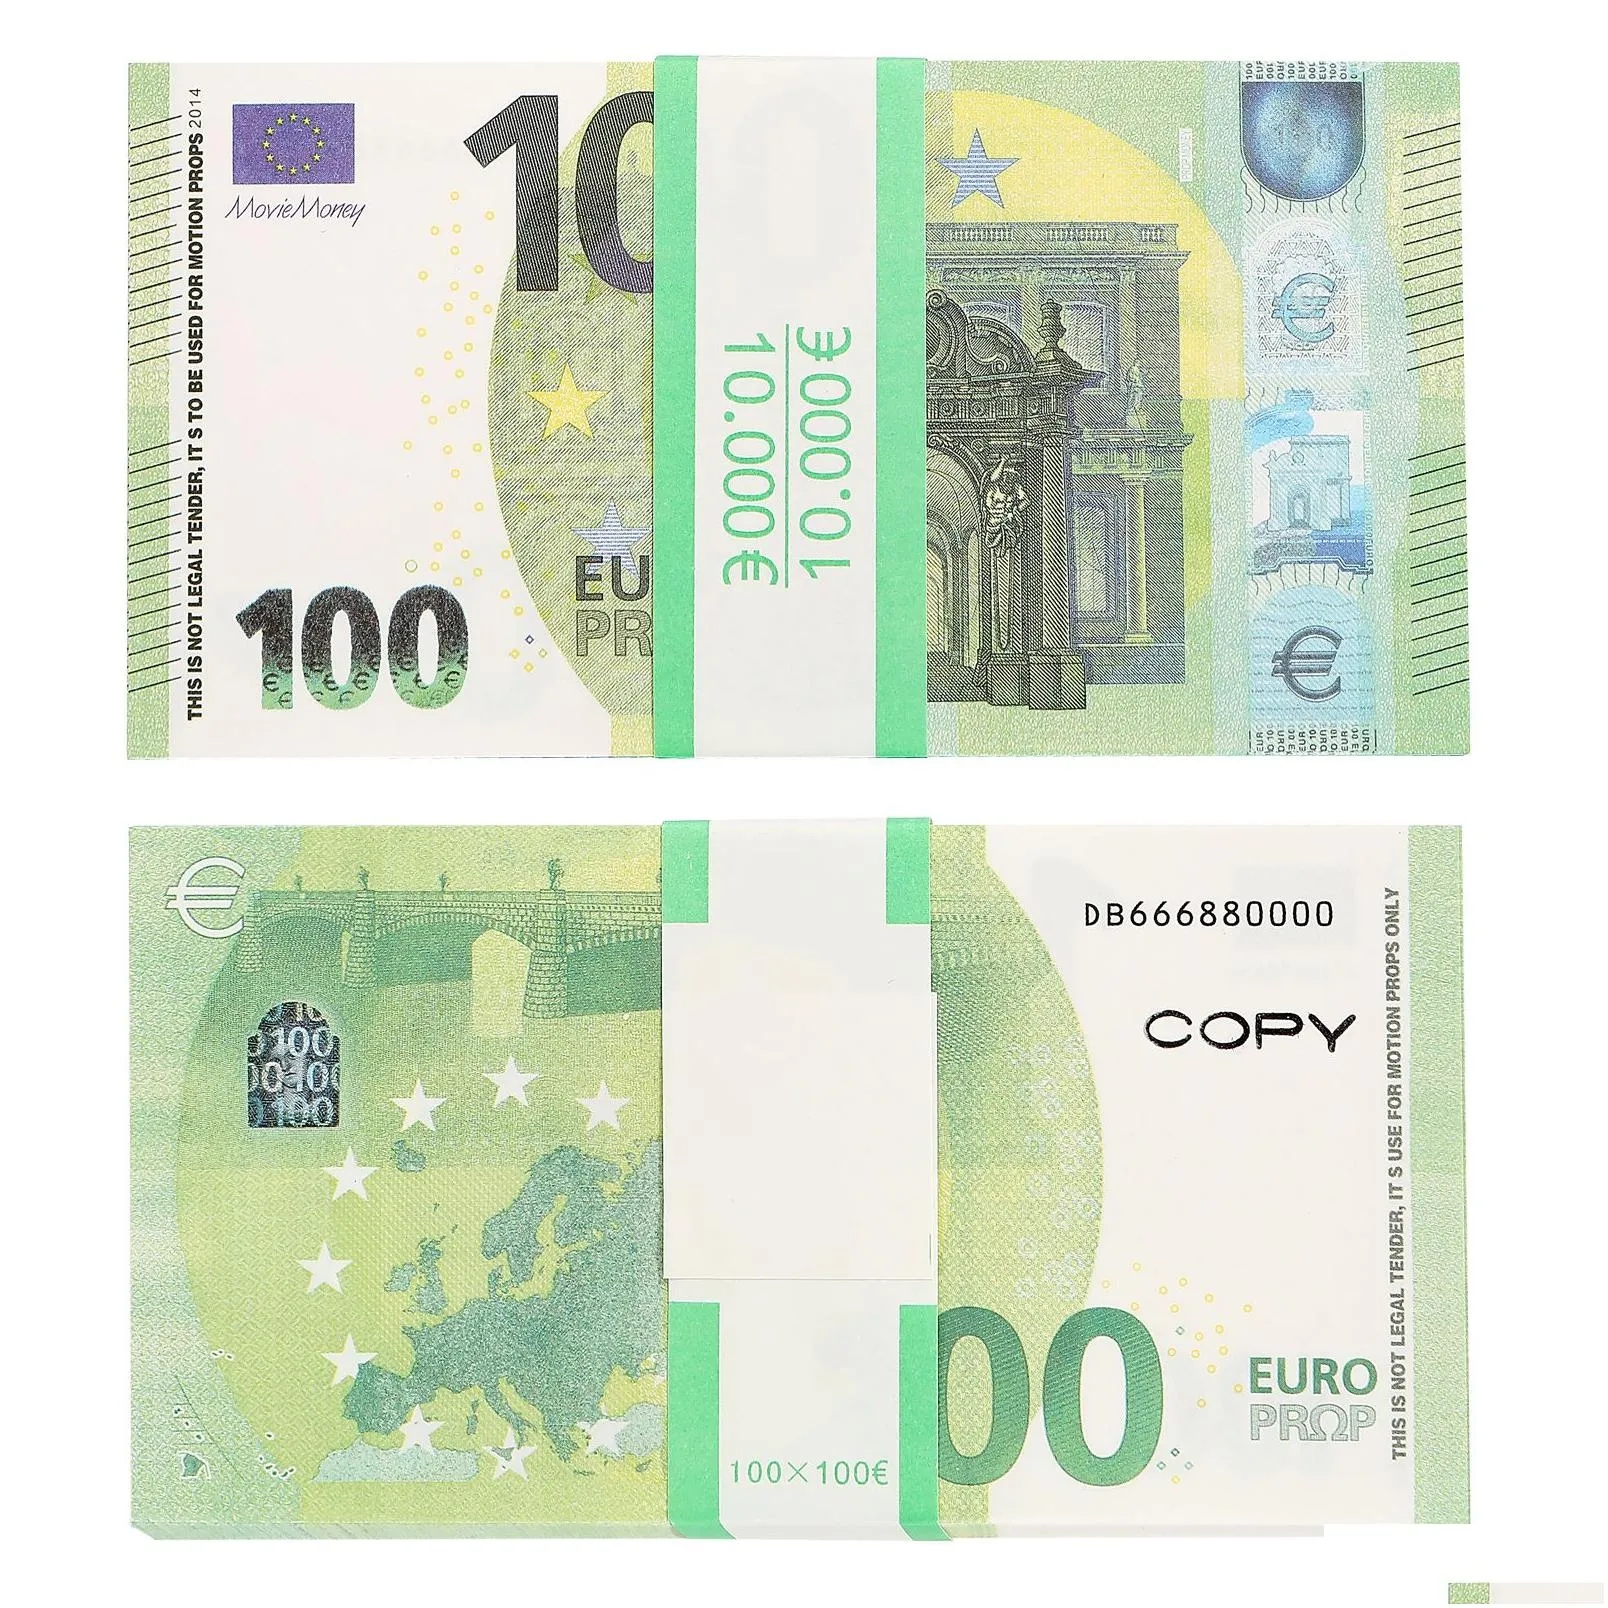 50% Size Prop Money Copy Toy Euros Party Realistic Fake uk Banknotes Paper Money Pretend Double Sided